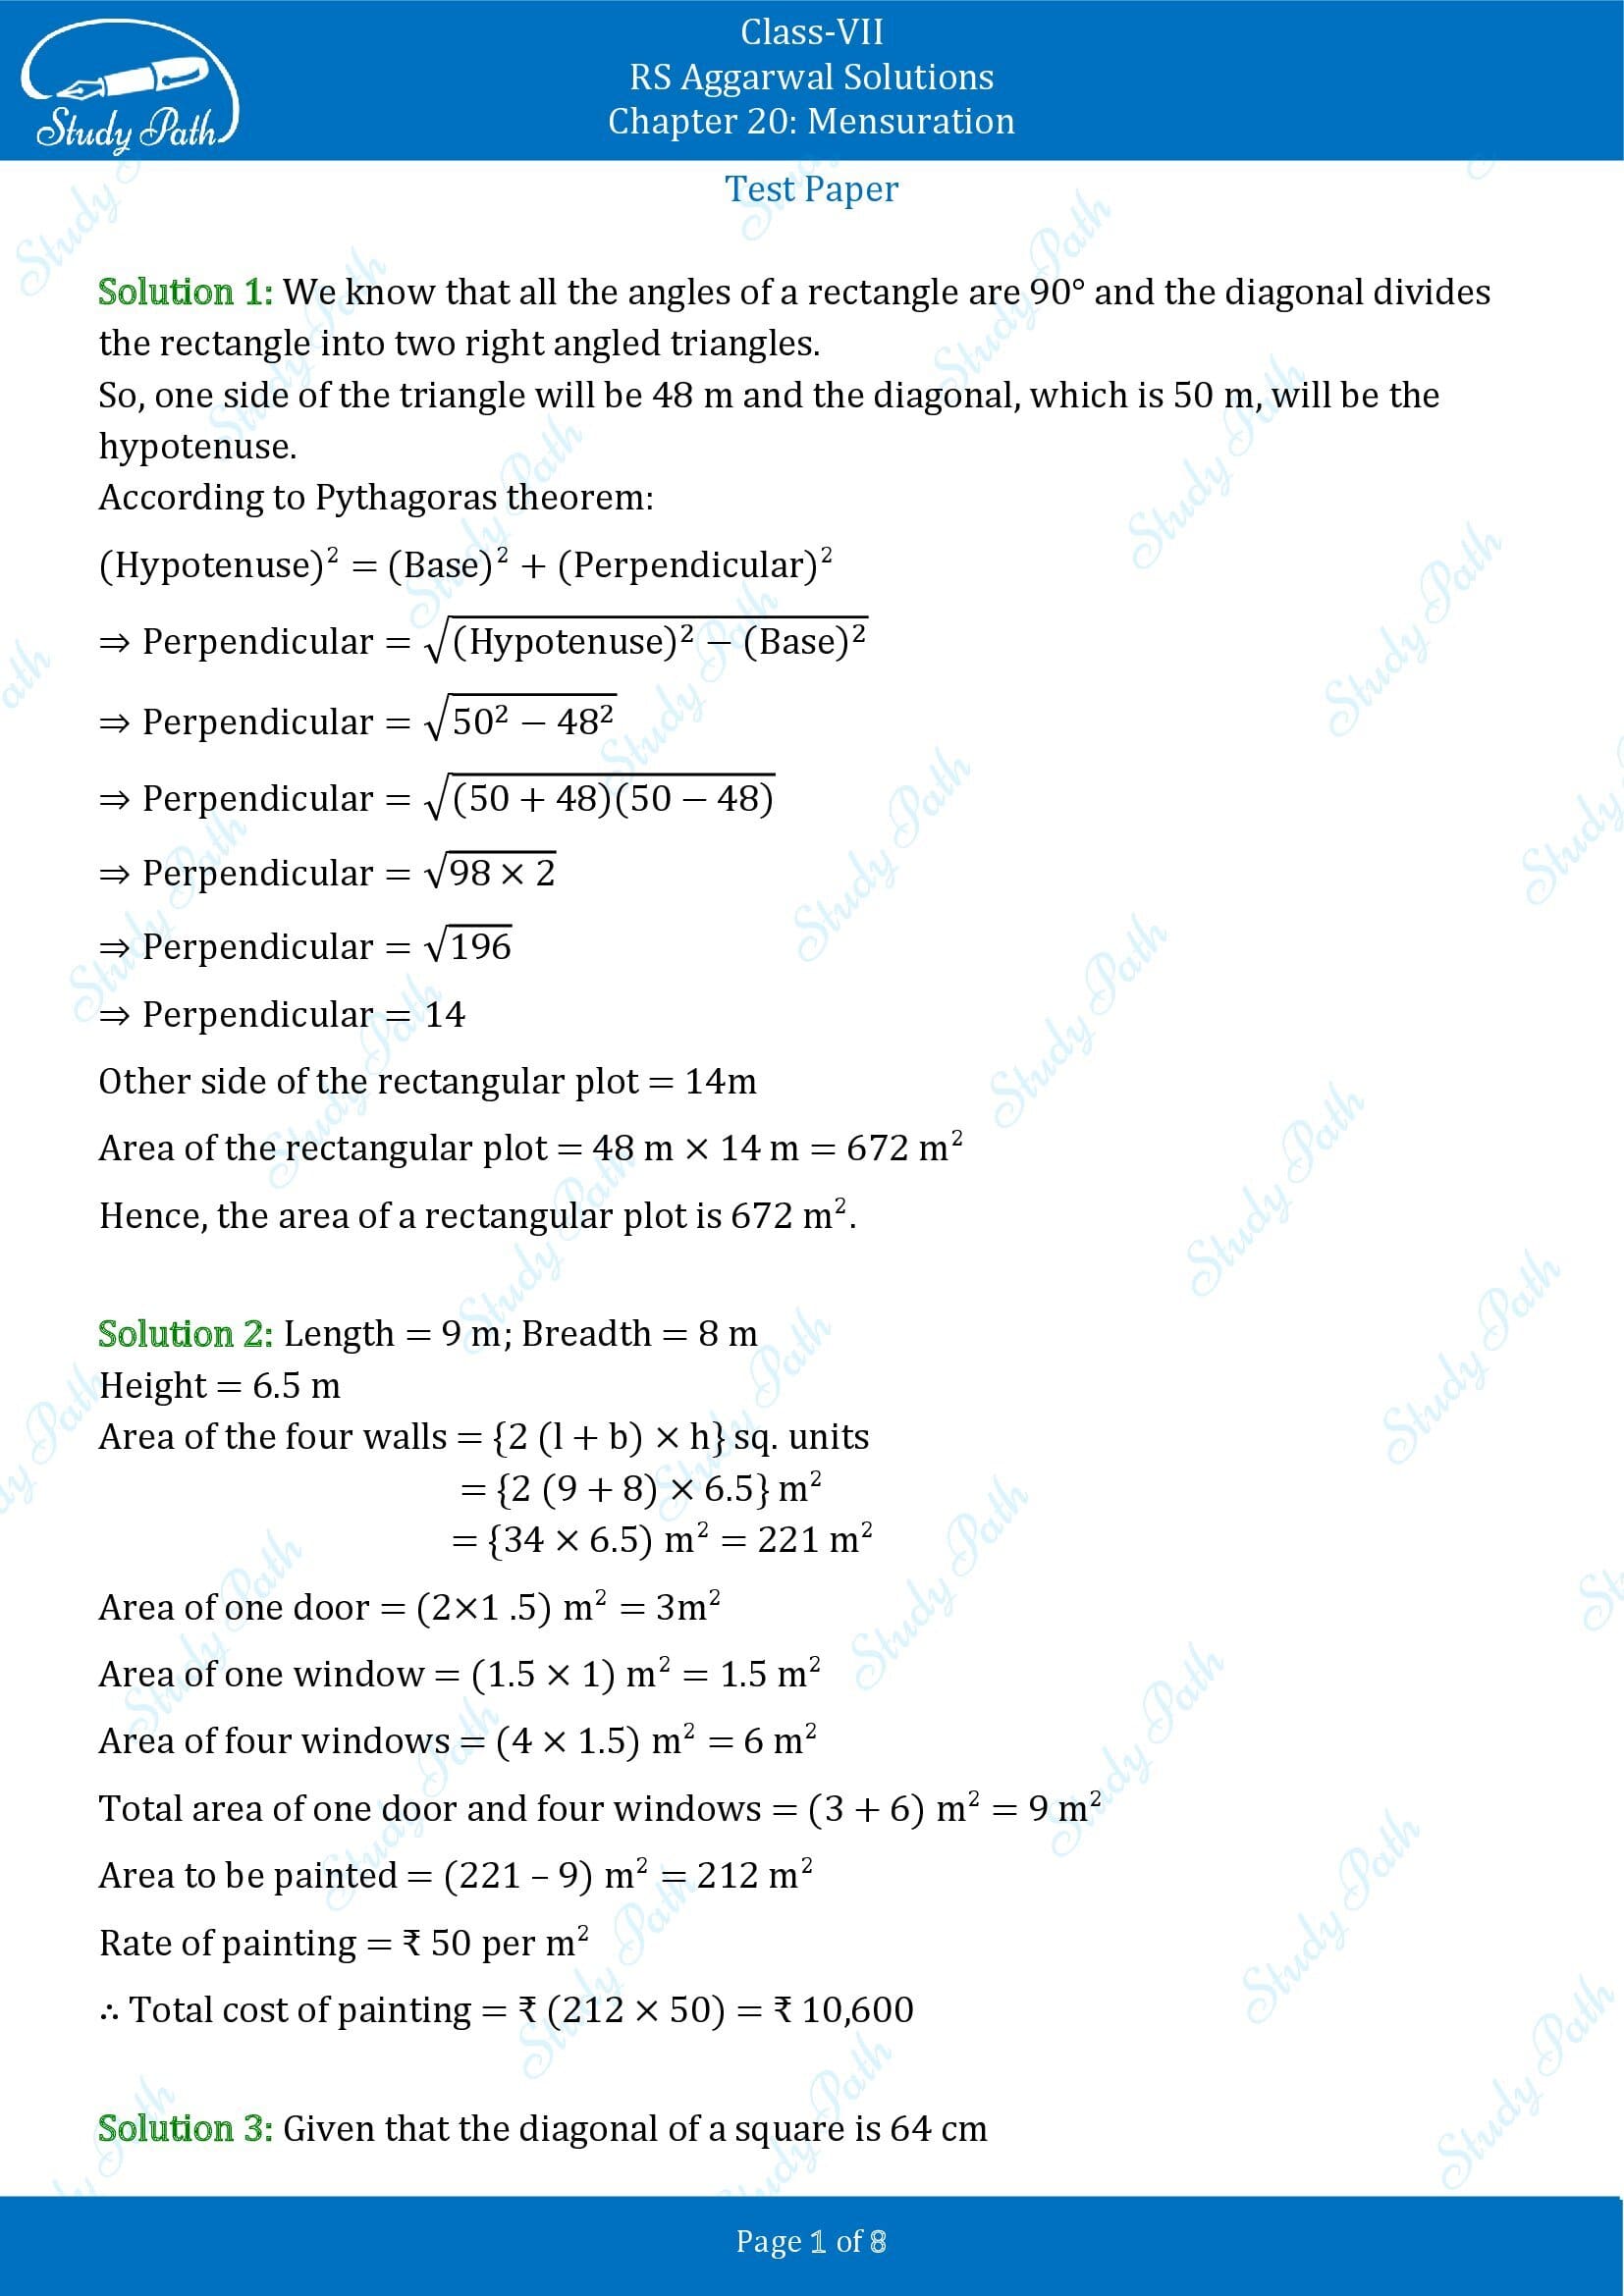 RS Aggarwal Solutions Class 7 Chapter 20 Mensuration Test Paper 20 0001